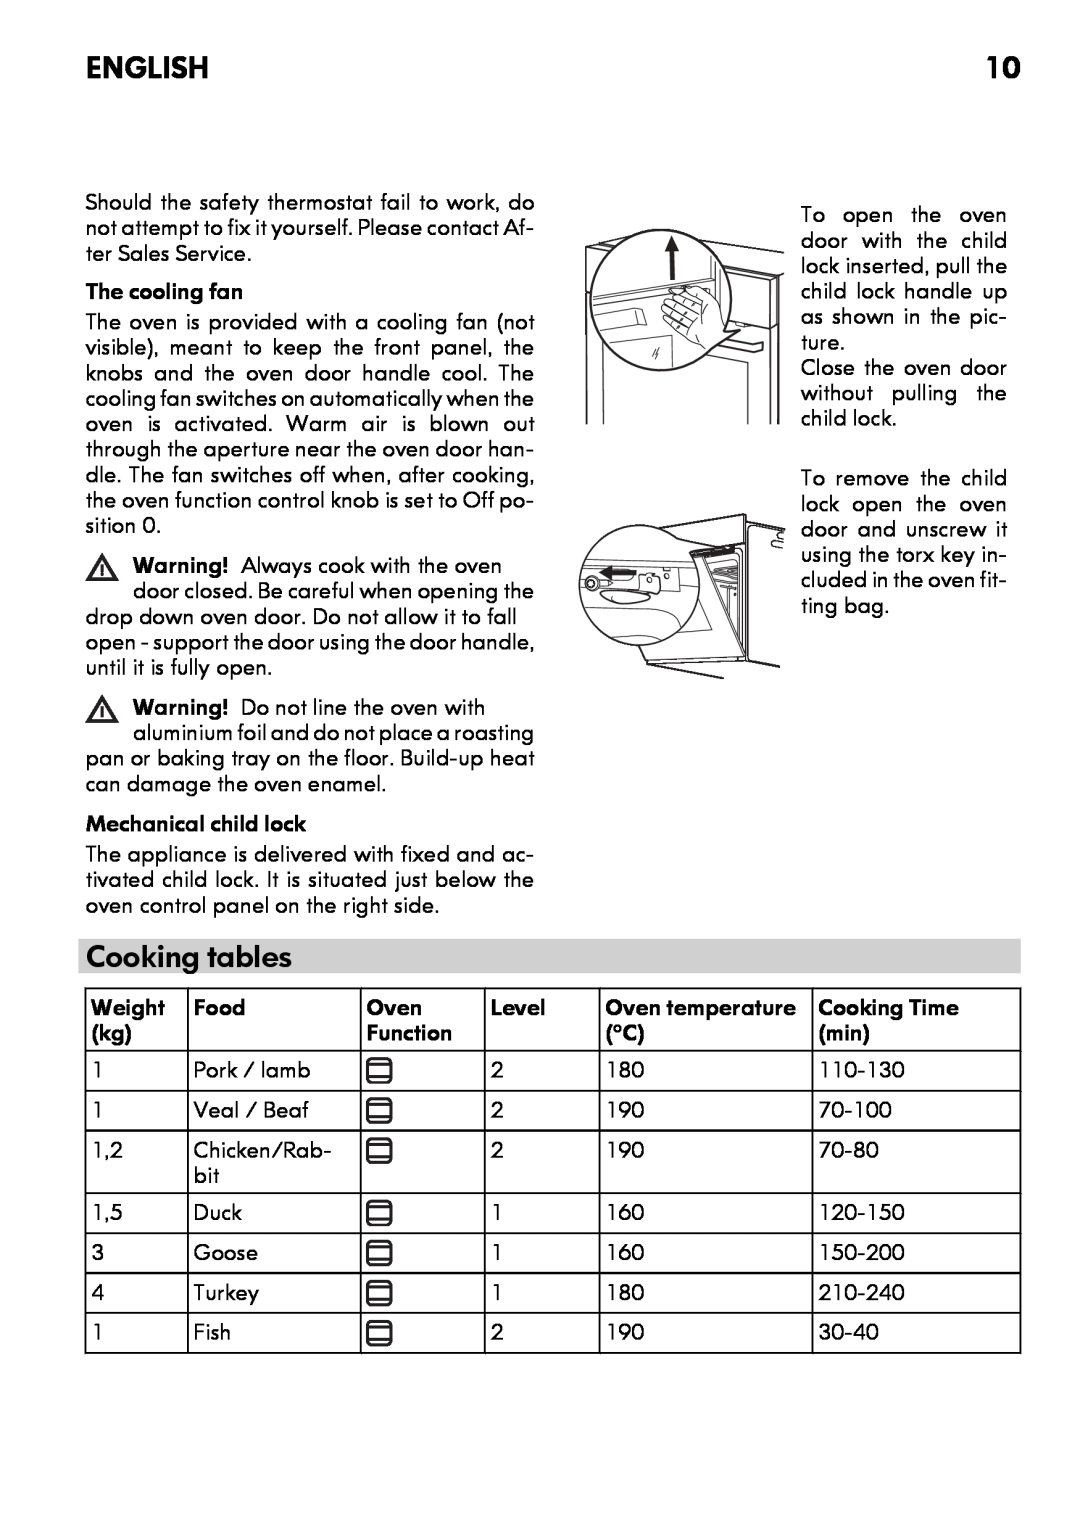 IKEA CG3 manual Cooking tables, English, The cooling fan 